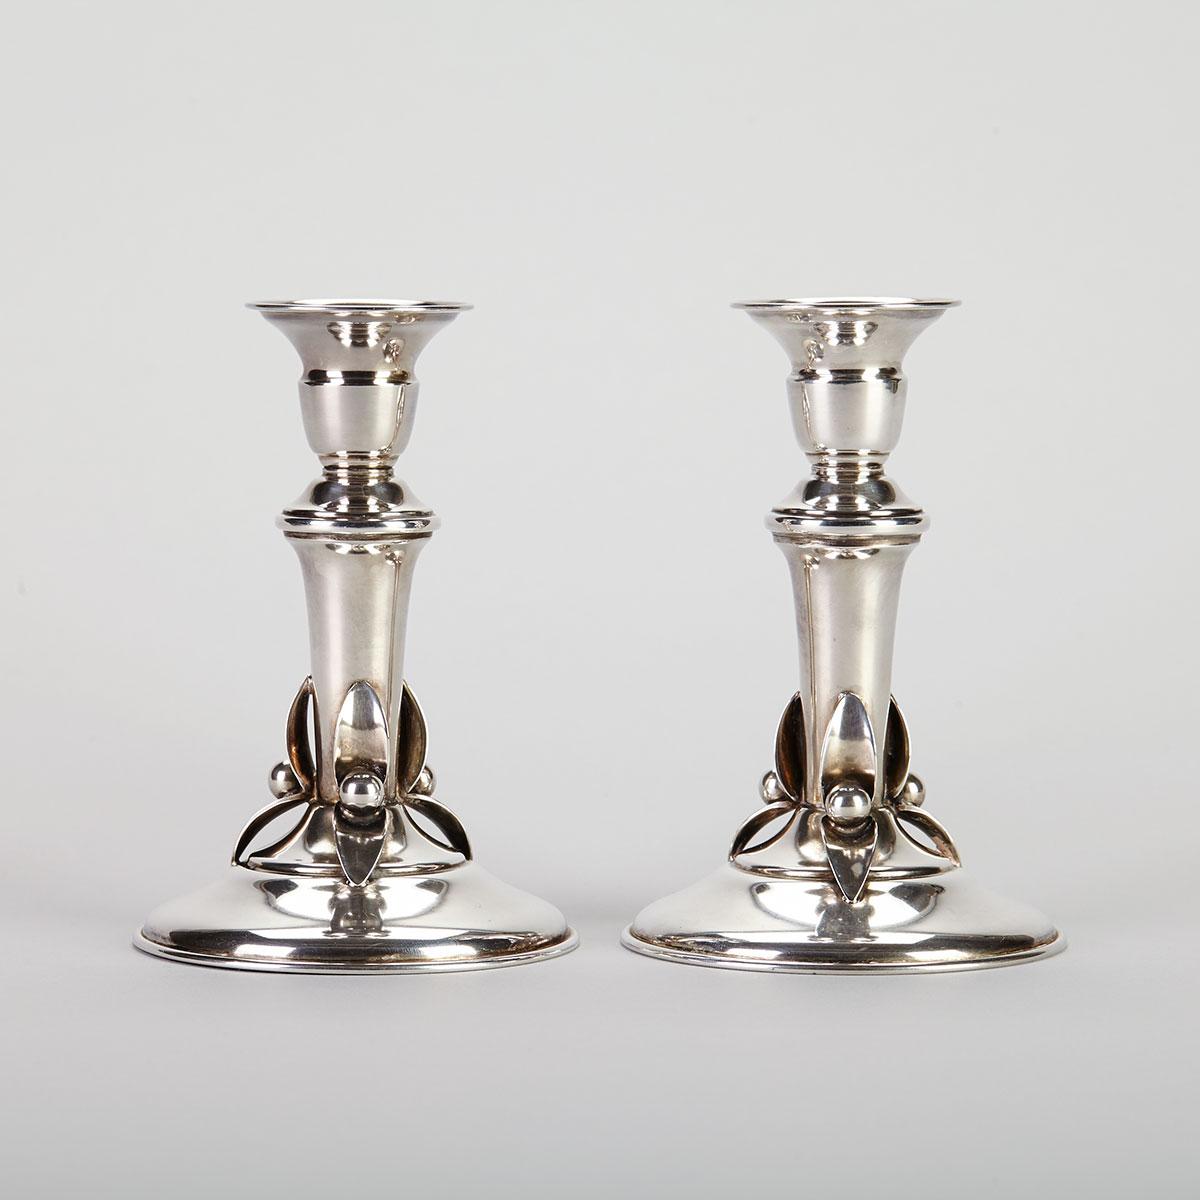 Pair of Canadian Silver Candlesticks, Carl Poul Petersen, Montreal, Que., mid-20th century